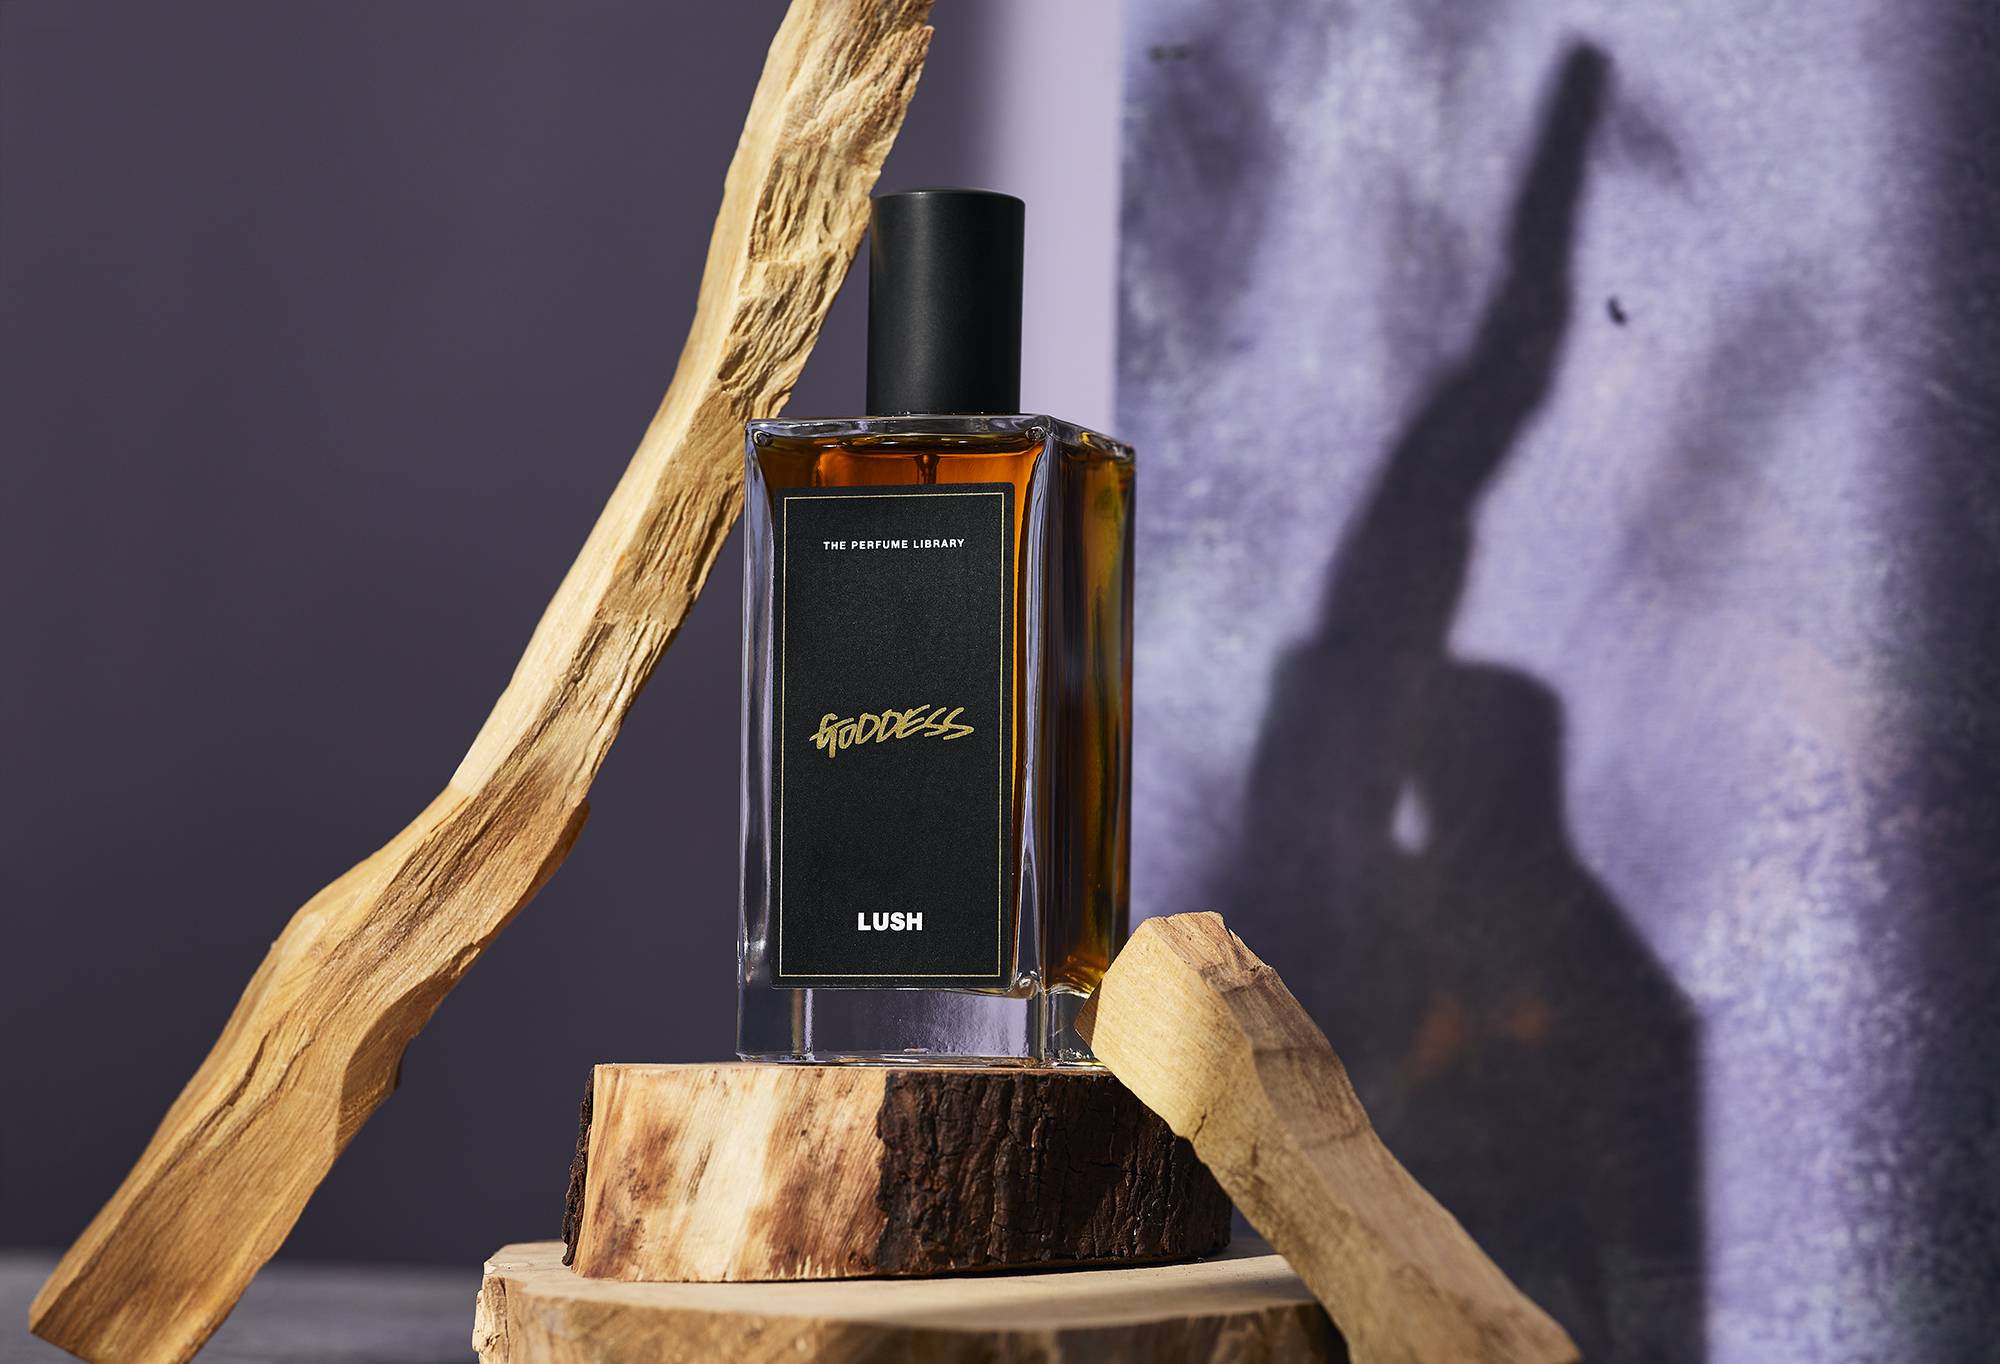 A dark amber coloured bottled perfume, Goddess, sits on top of a display of sandalwood, one of it's main ingredients.